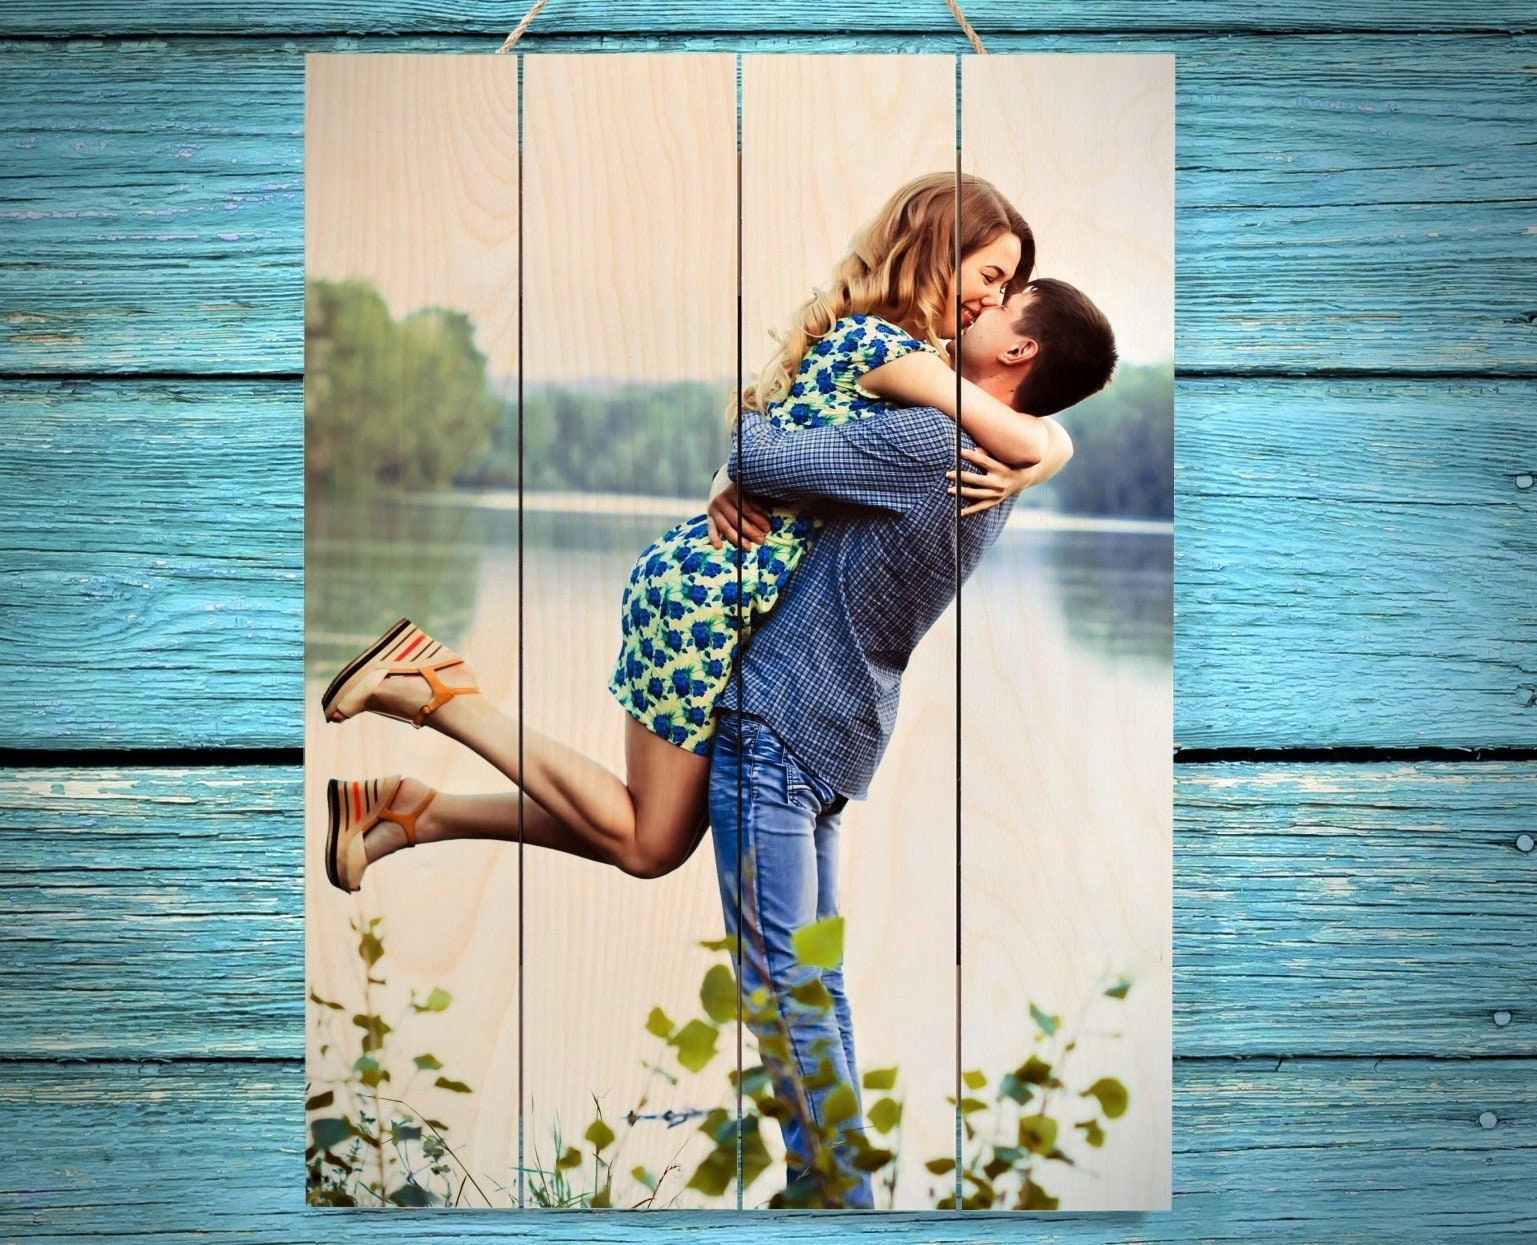 ...Your Favourite Photo's Custom Printed on Wooden Pallets - Available...